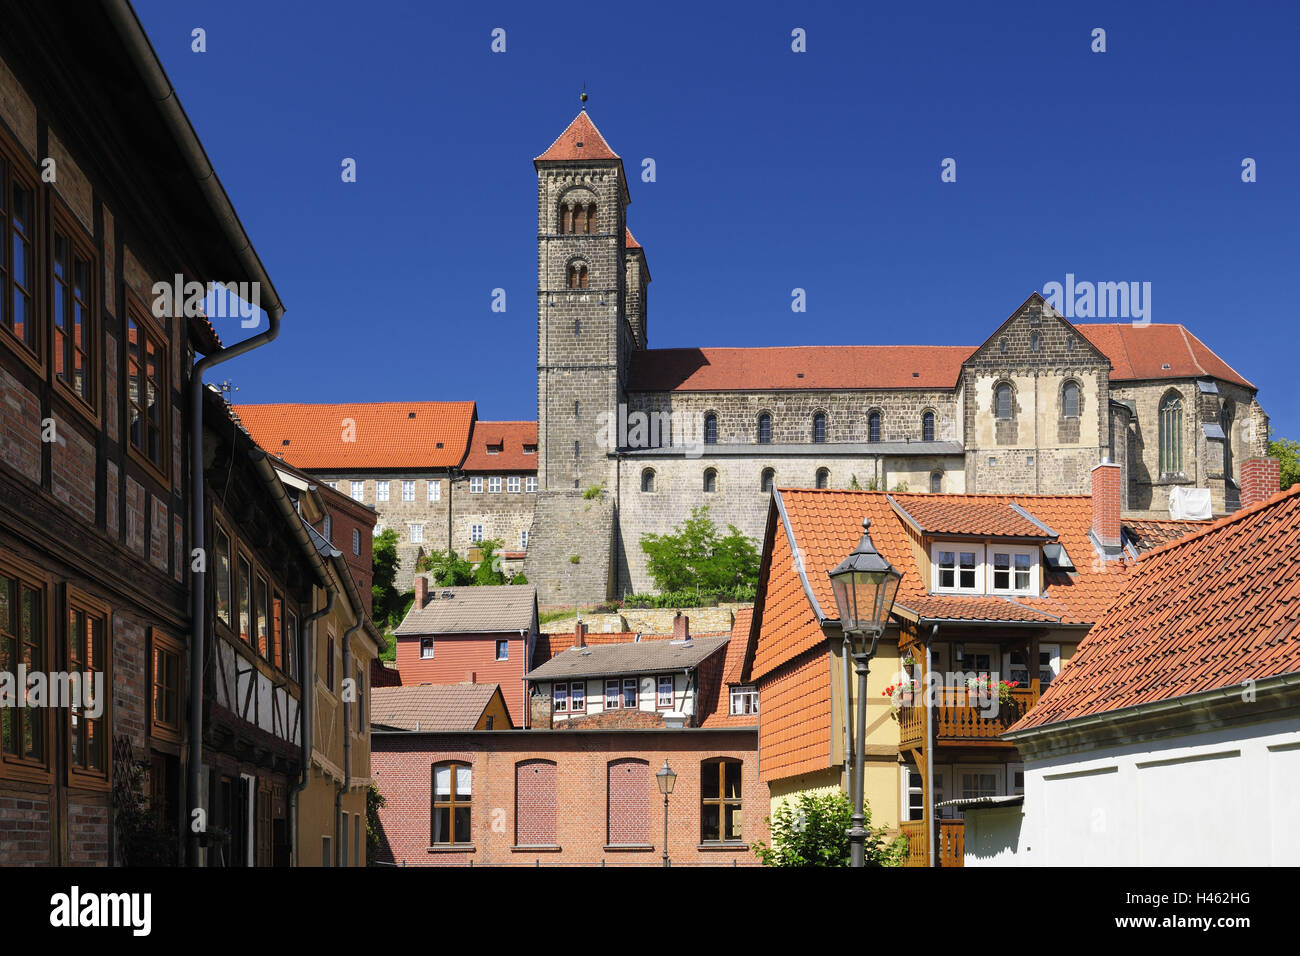 Germany, Saxony-Anhalt, Quedlinburg, view to the castle hill, Stock Photo